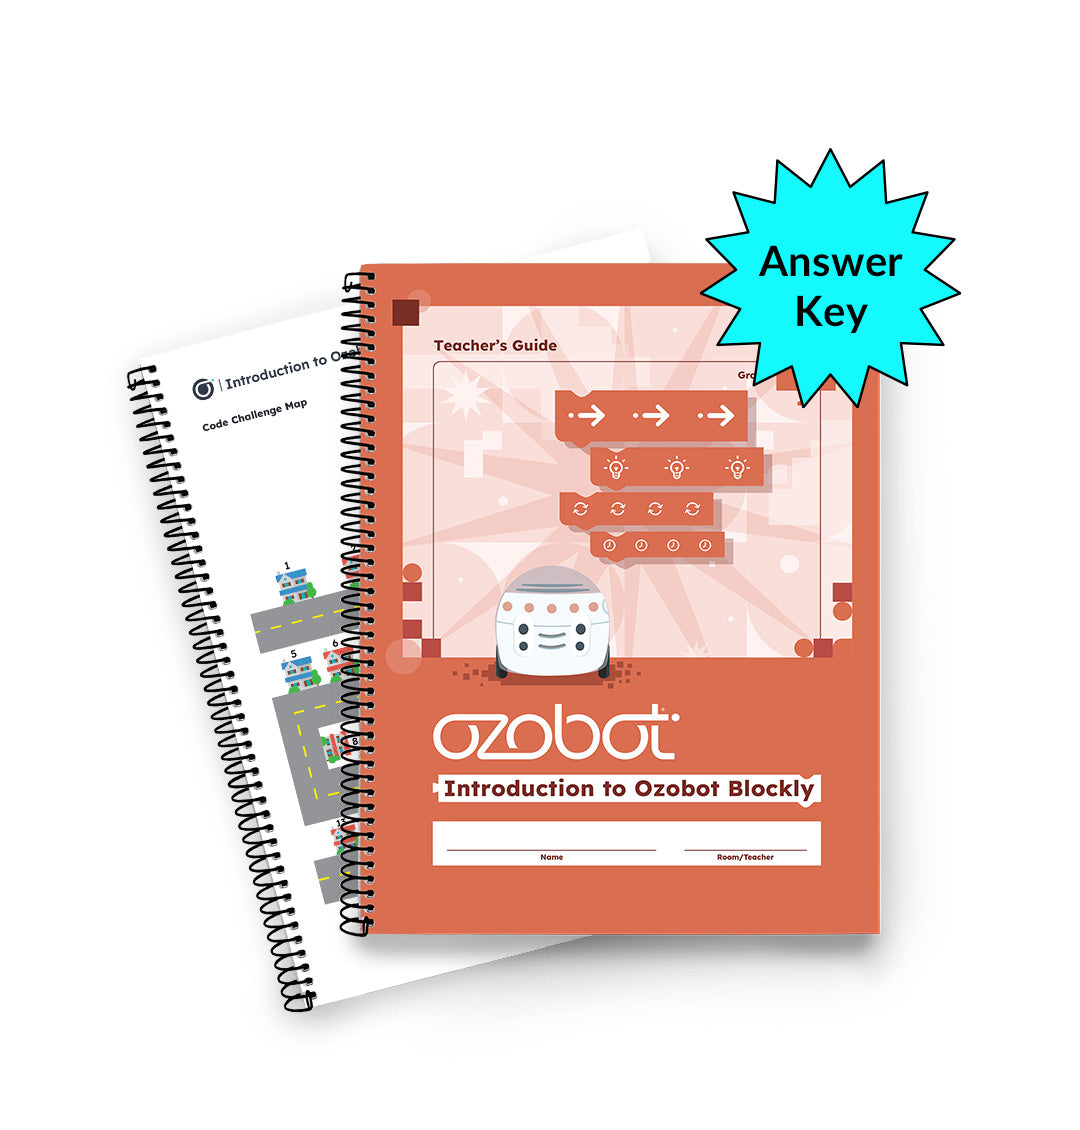 Introduction to Ozobot  Blockly Curriculum (Answer Key)